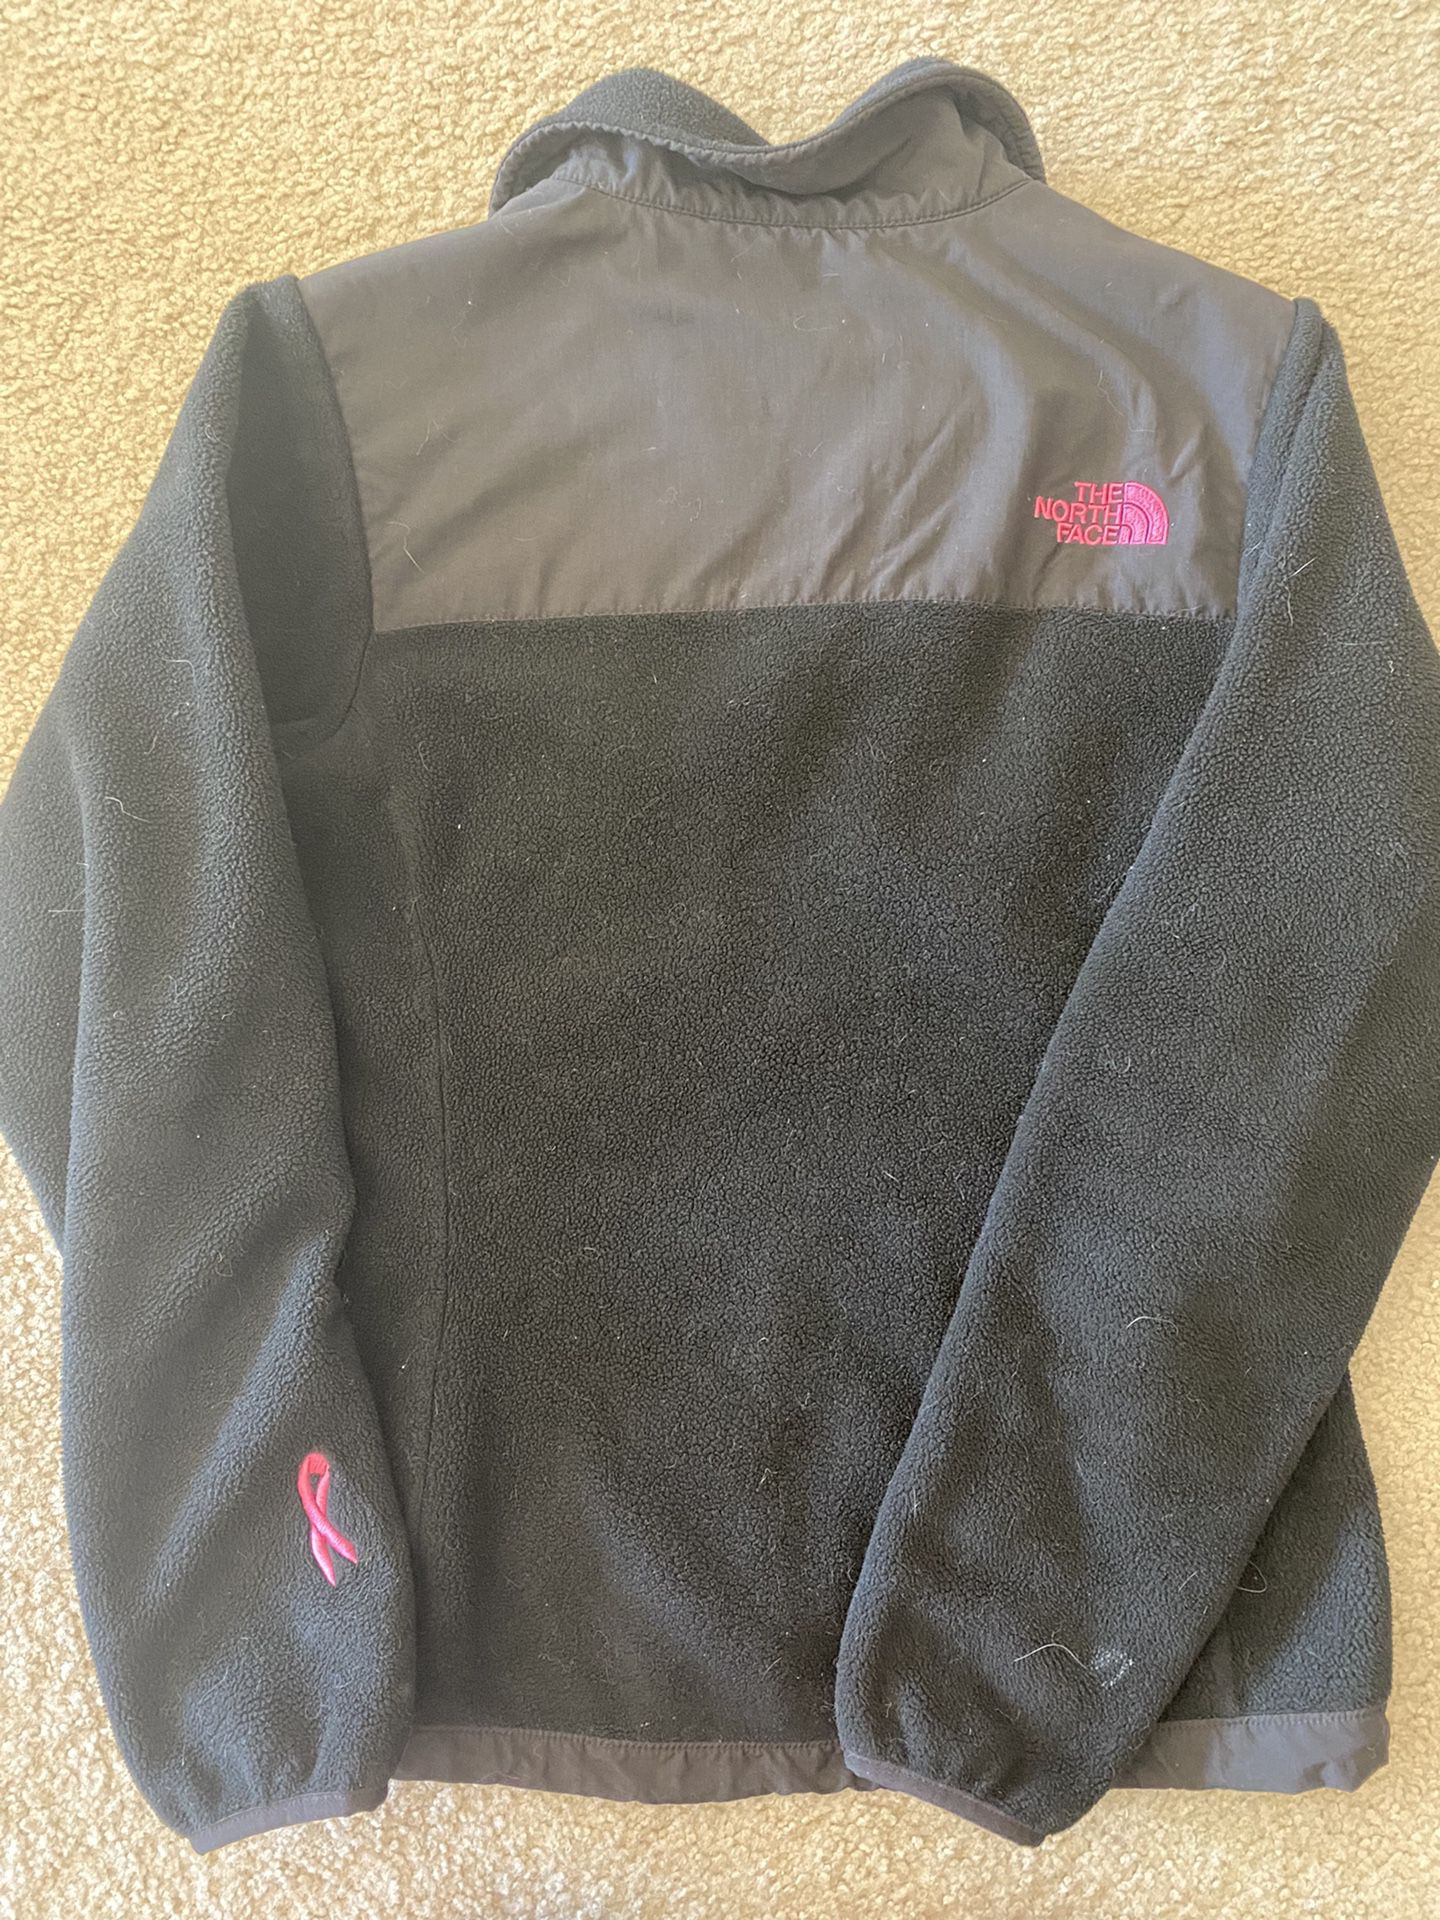 North Face Breast Cancer Awareness Jacket